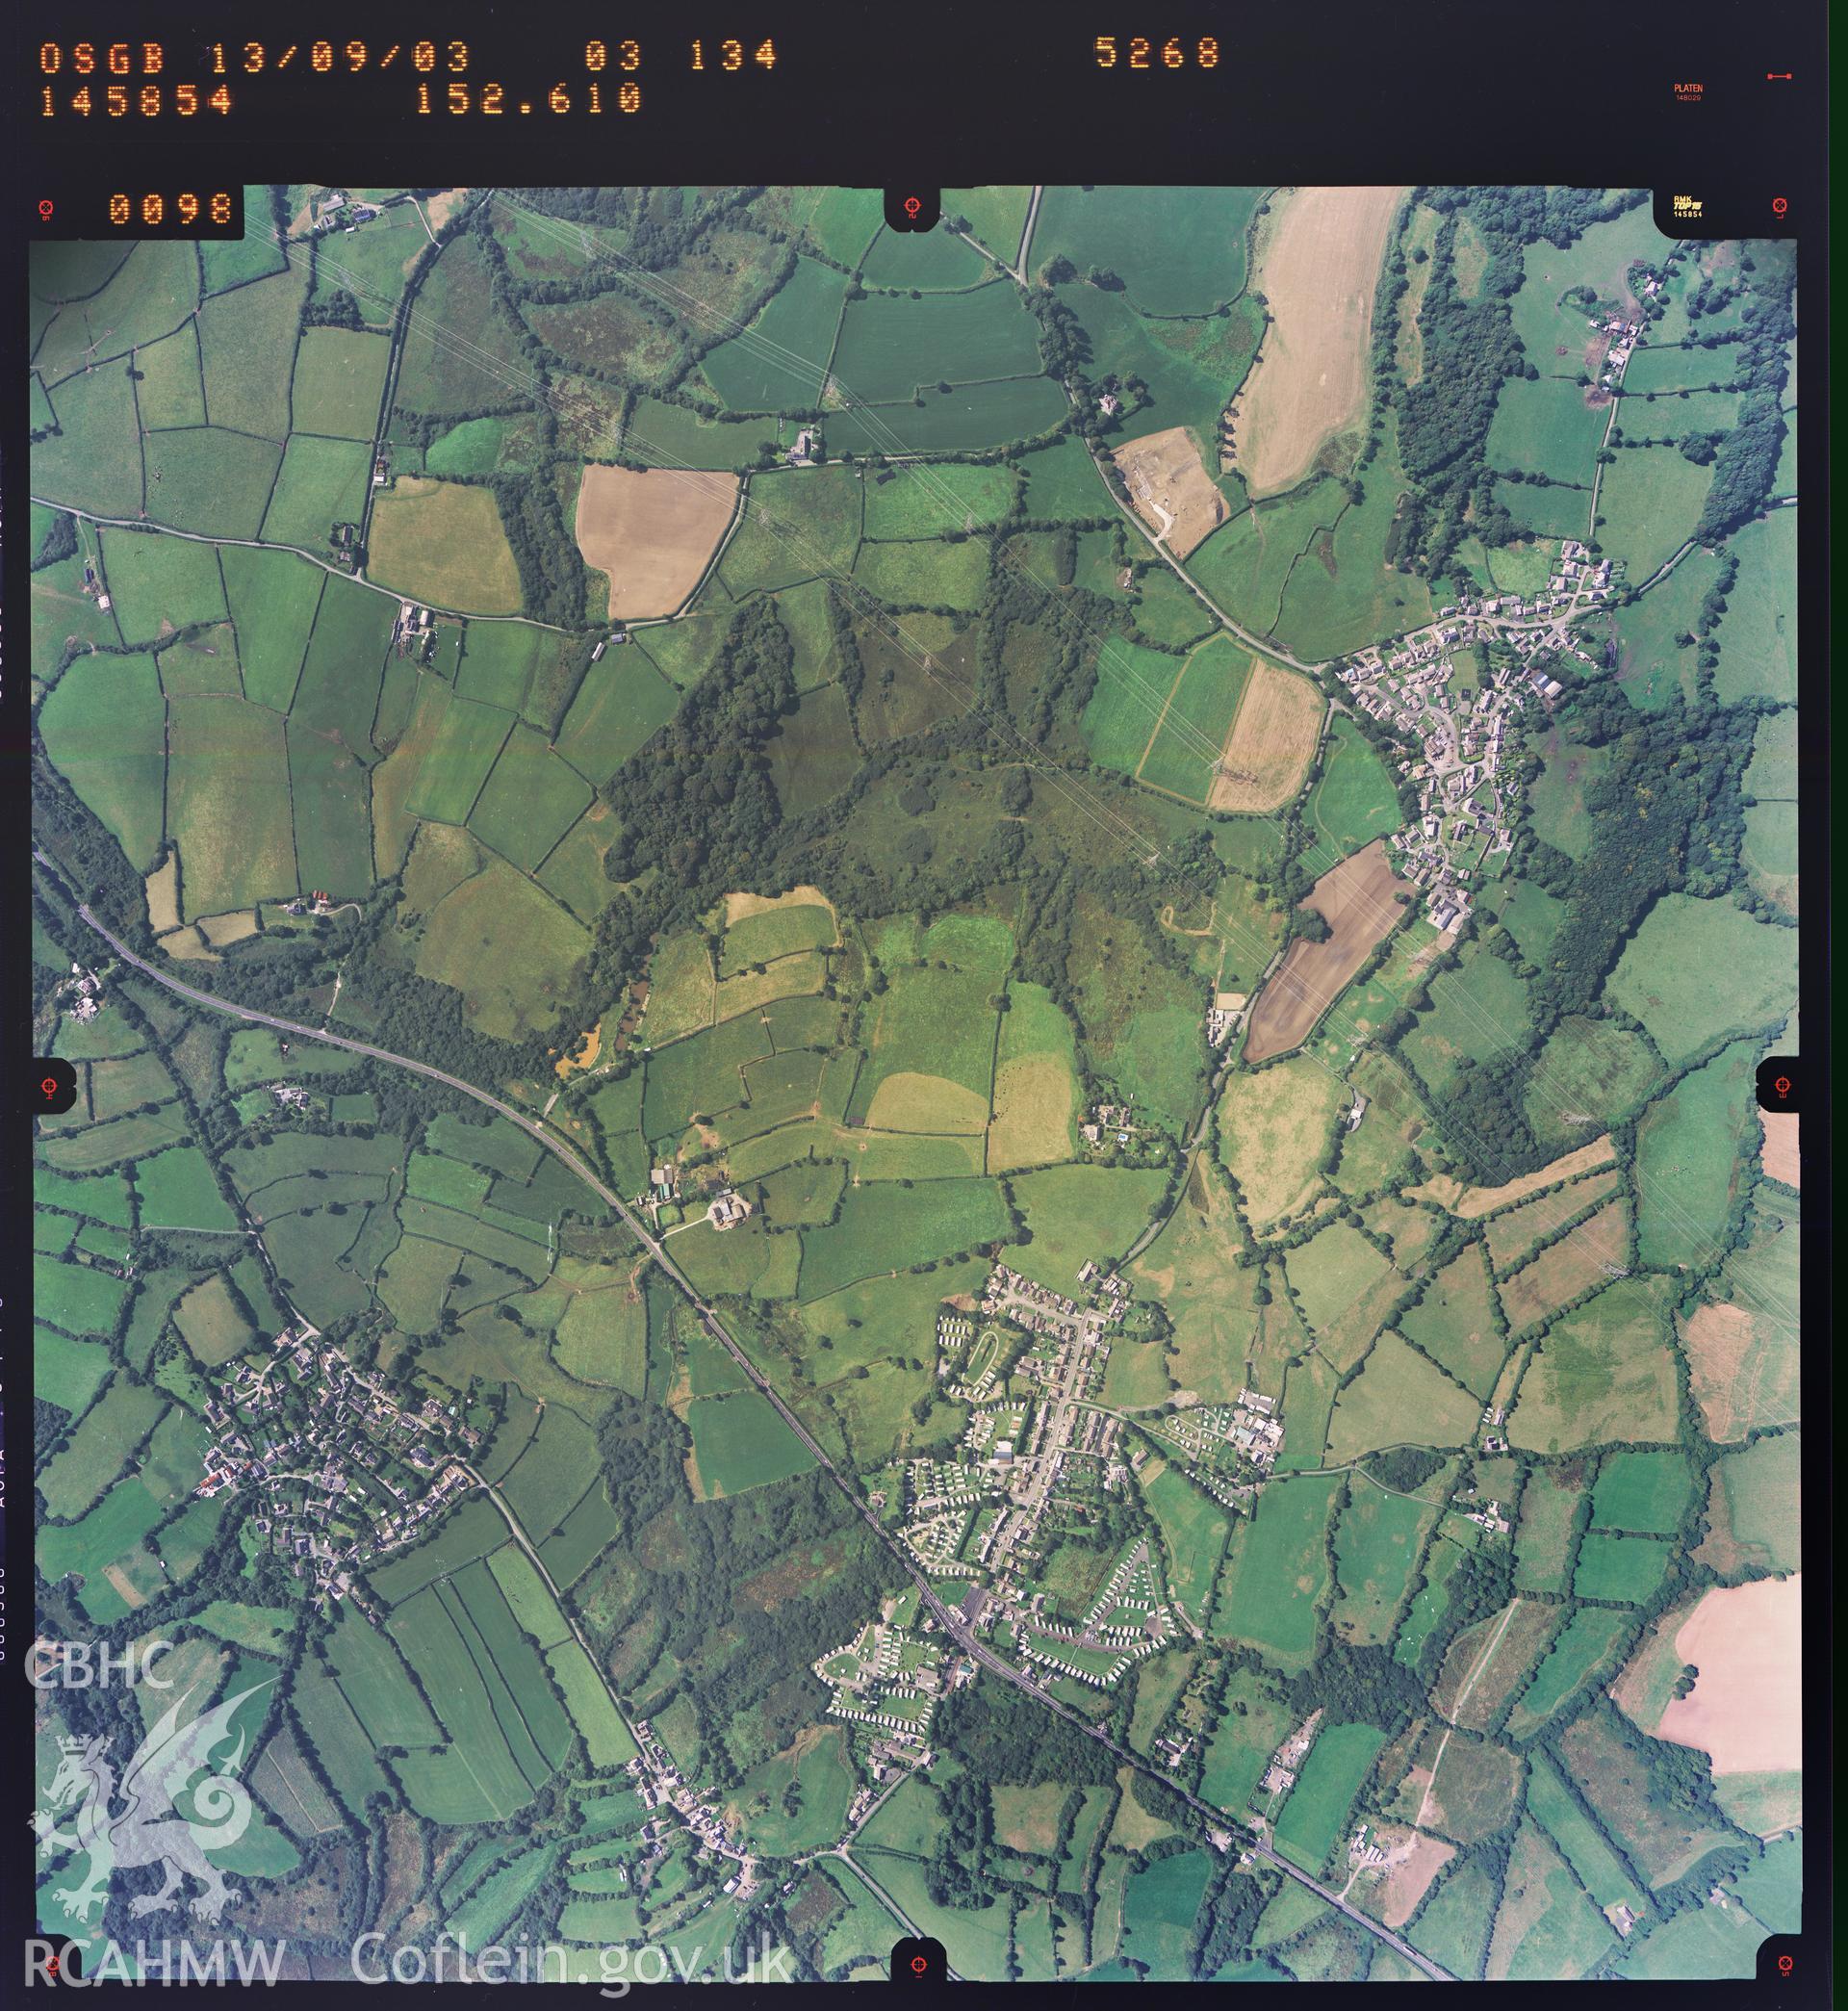 Digitized copy of a colour aerial photograph showing the Broadmoor area in Pembs, taken by Ordnance Survey, 2003.